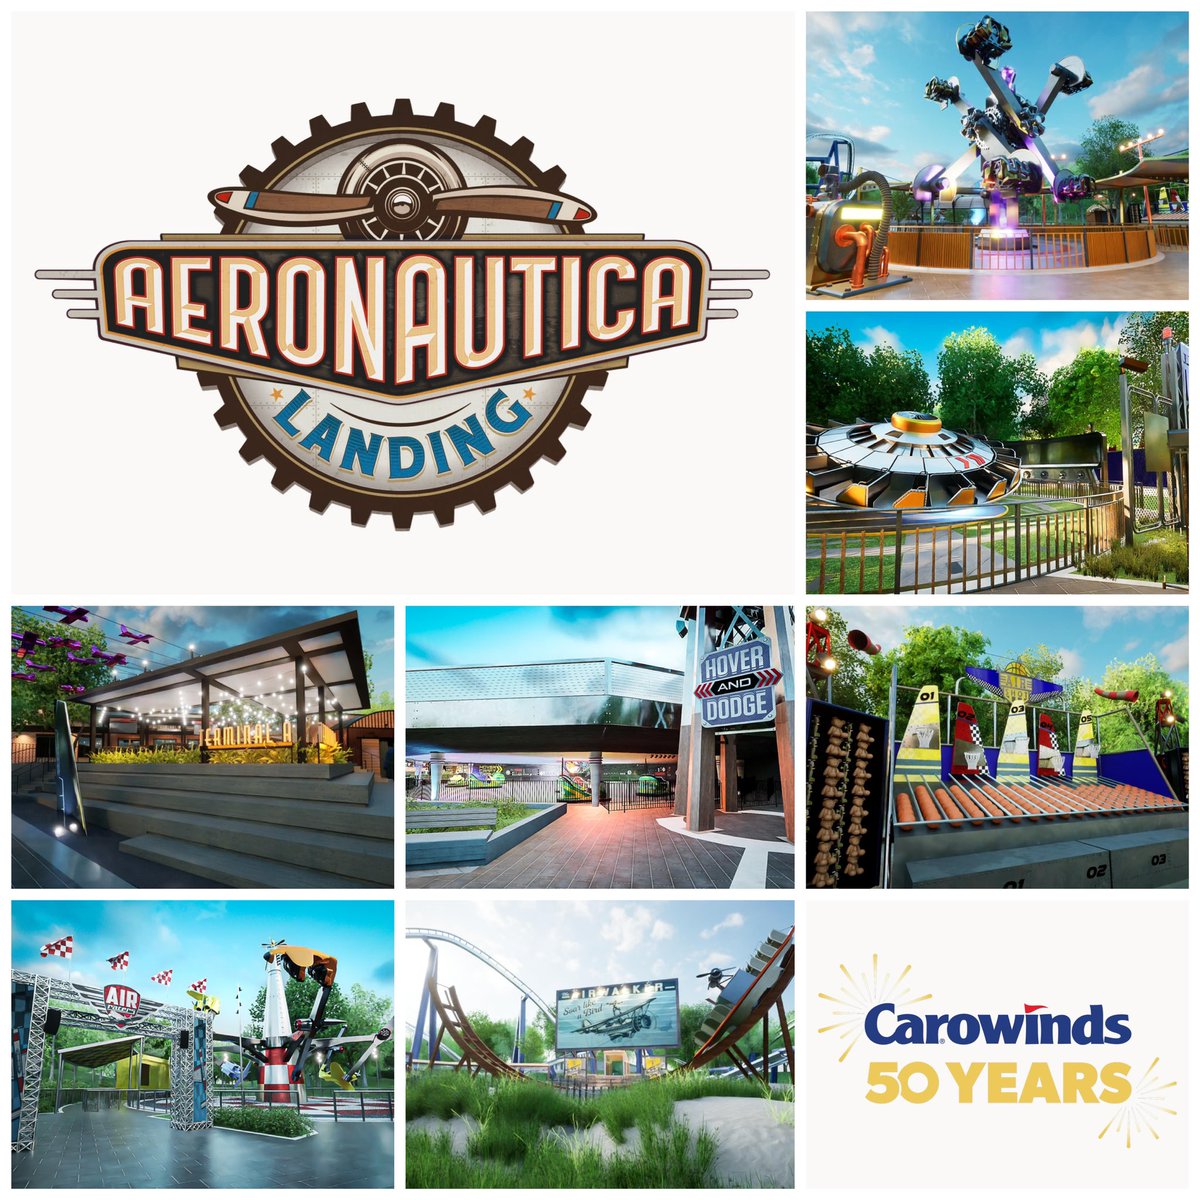 120 years of aviation history rolled into one amazing new themed area: Aeronautica Landing. Boarding begins in 2023 during the 50th Anniversary Celebration only at @Carowinds!